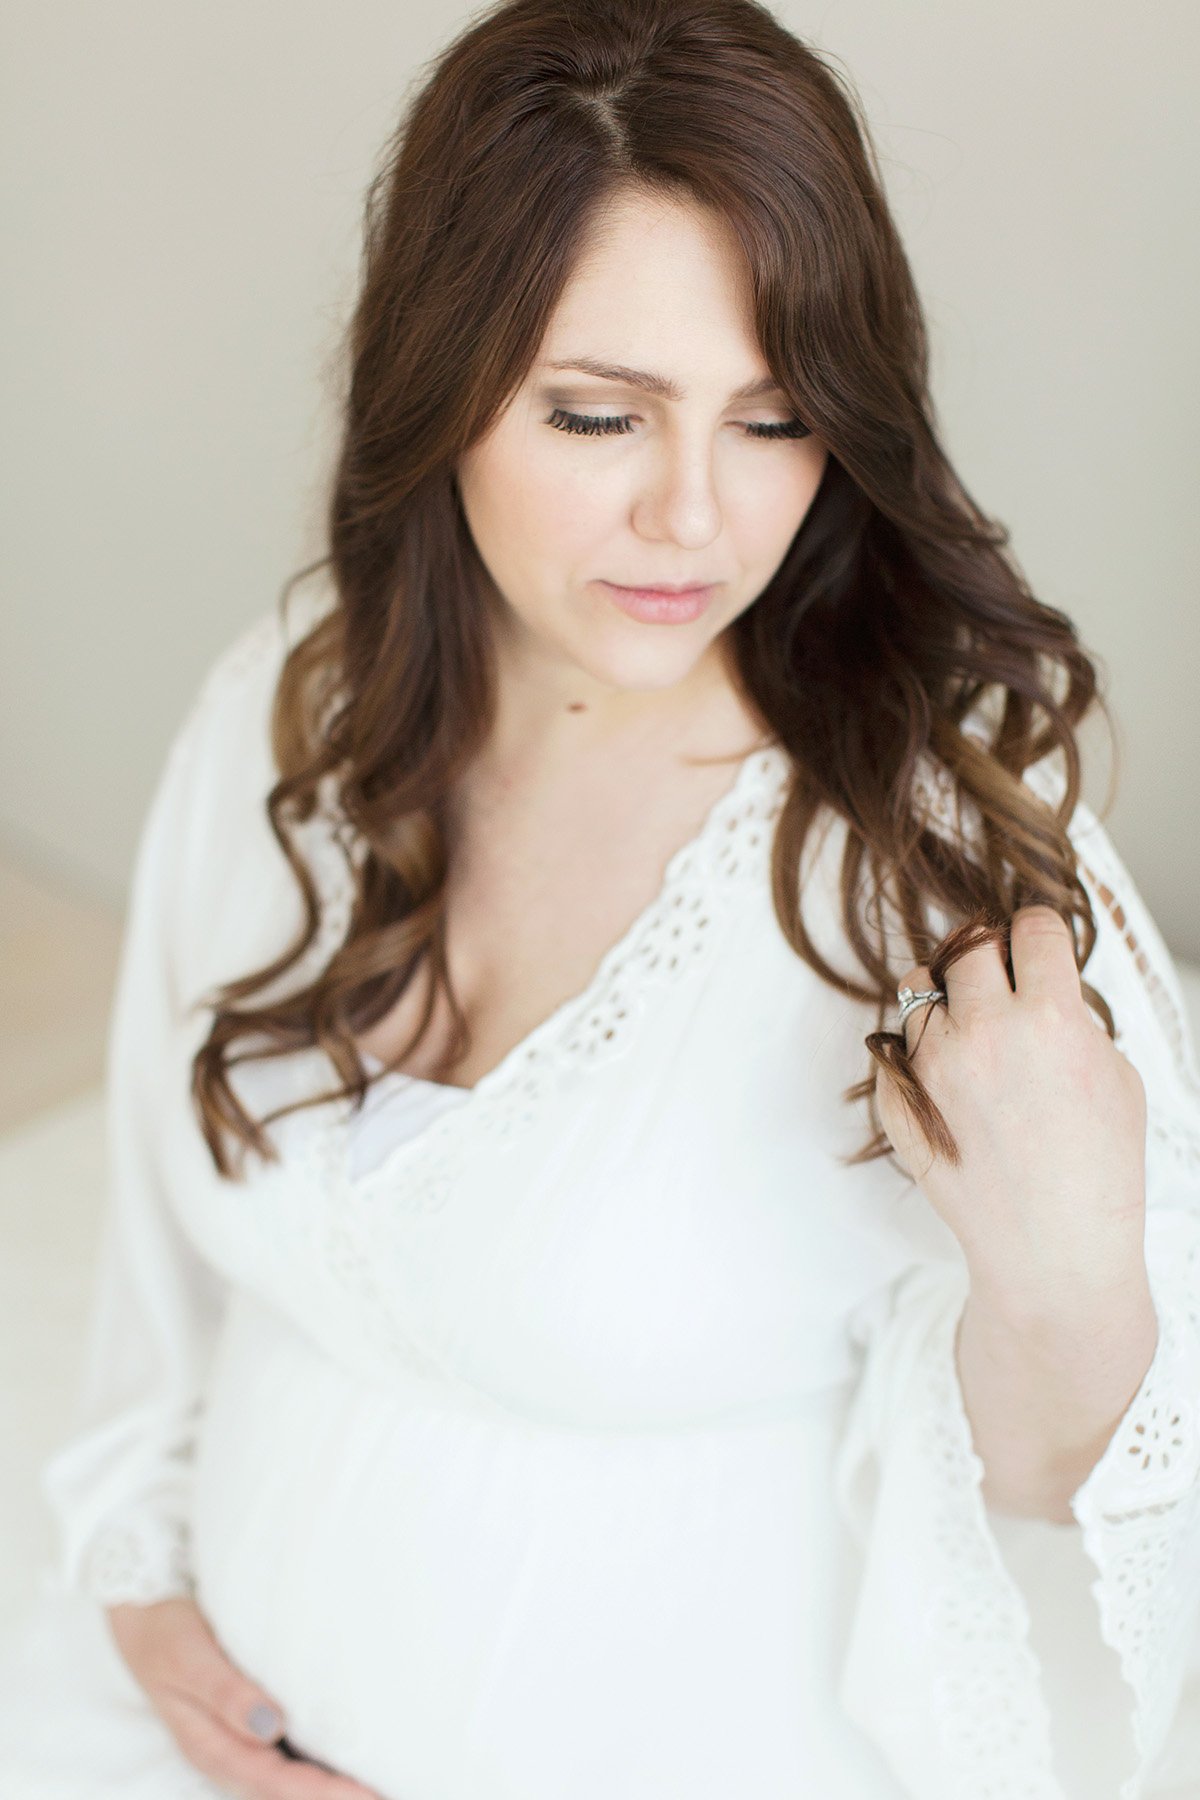 Pregnant mother poses wearing white dress borrowed from Julie Brock Photography Studio in Louisville KY